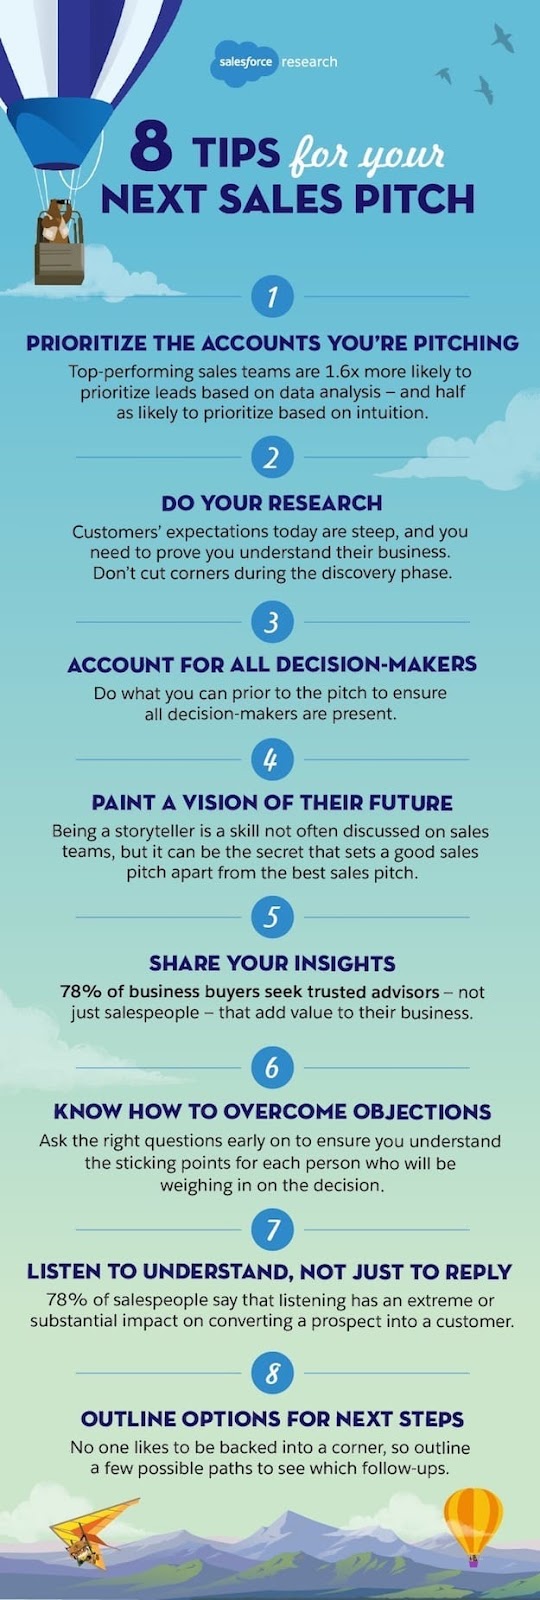 Sales pitch tips infographic